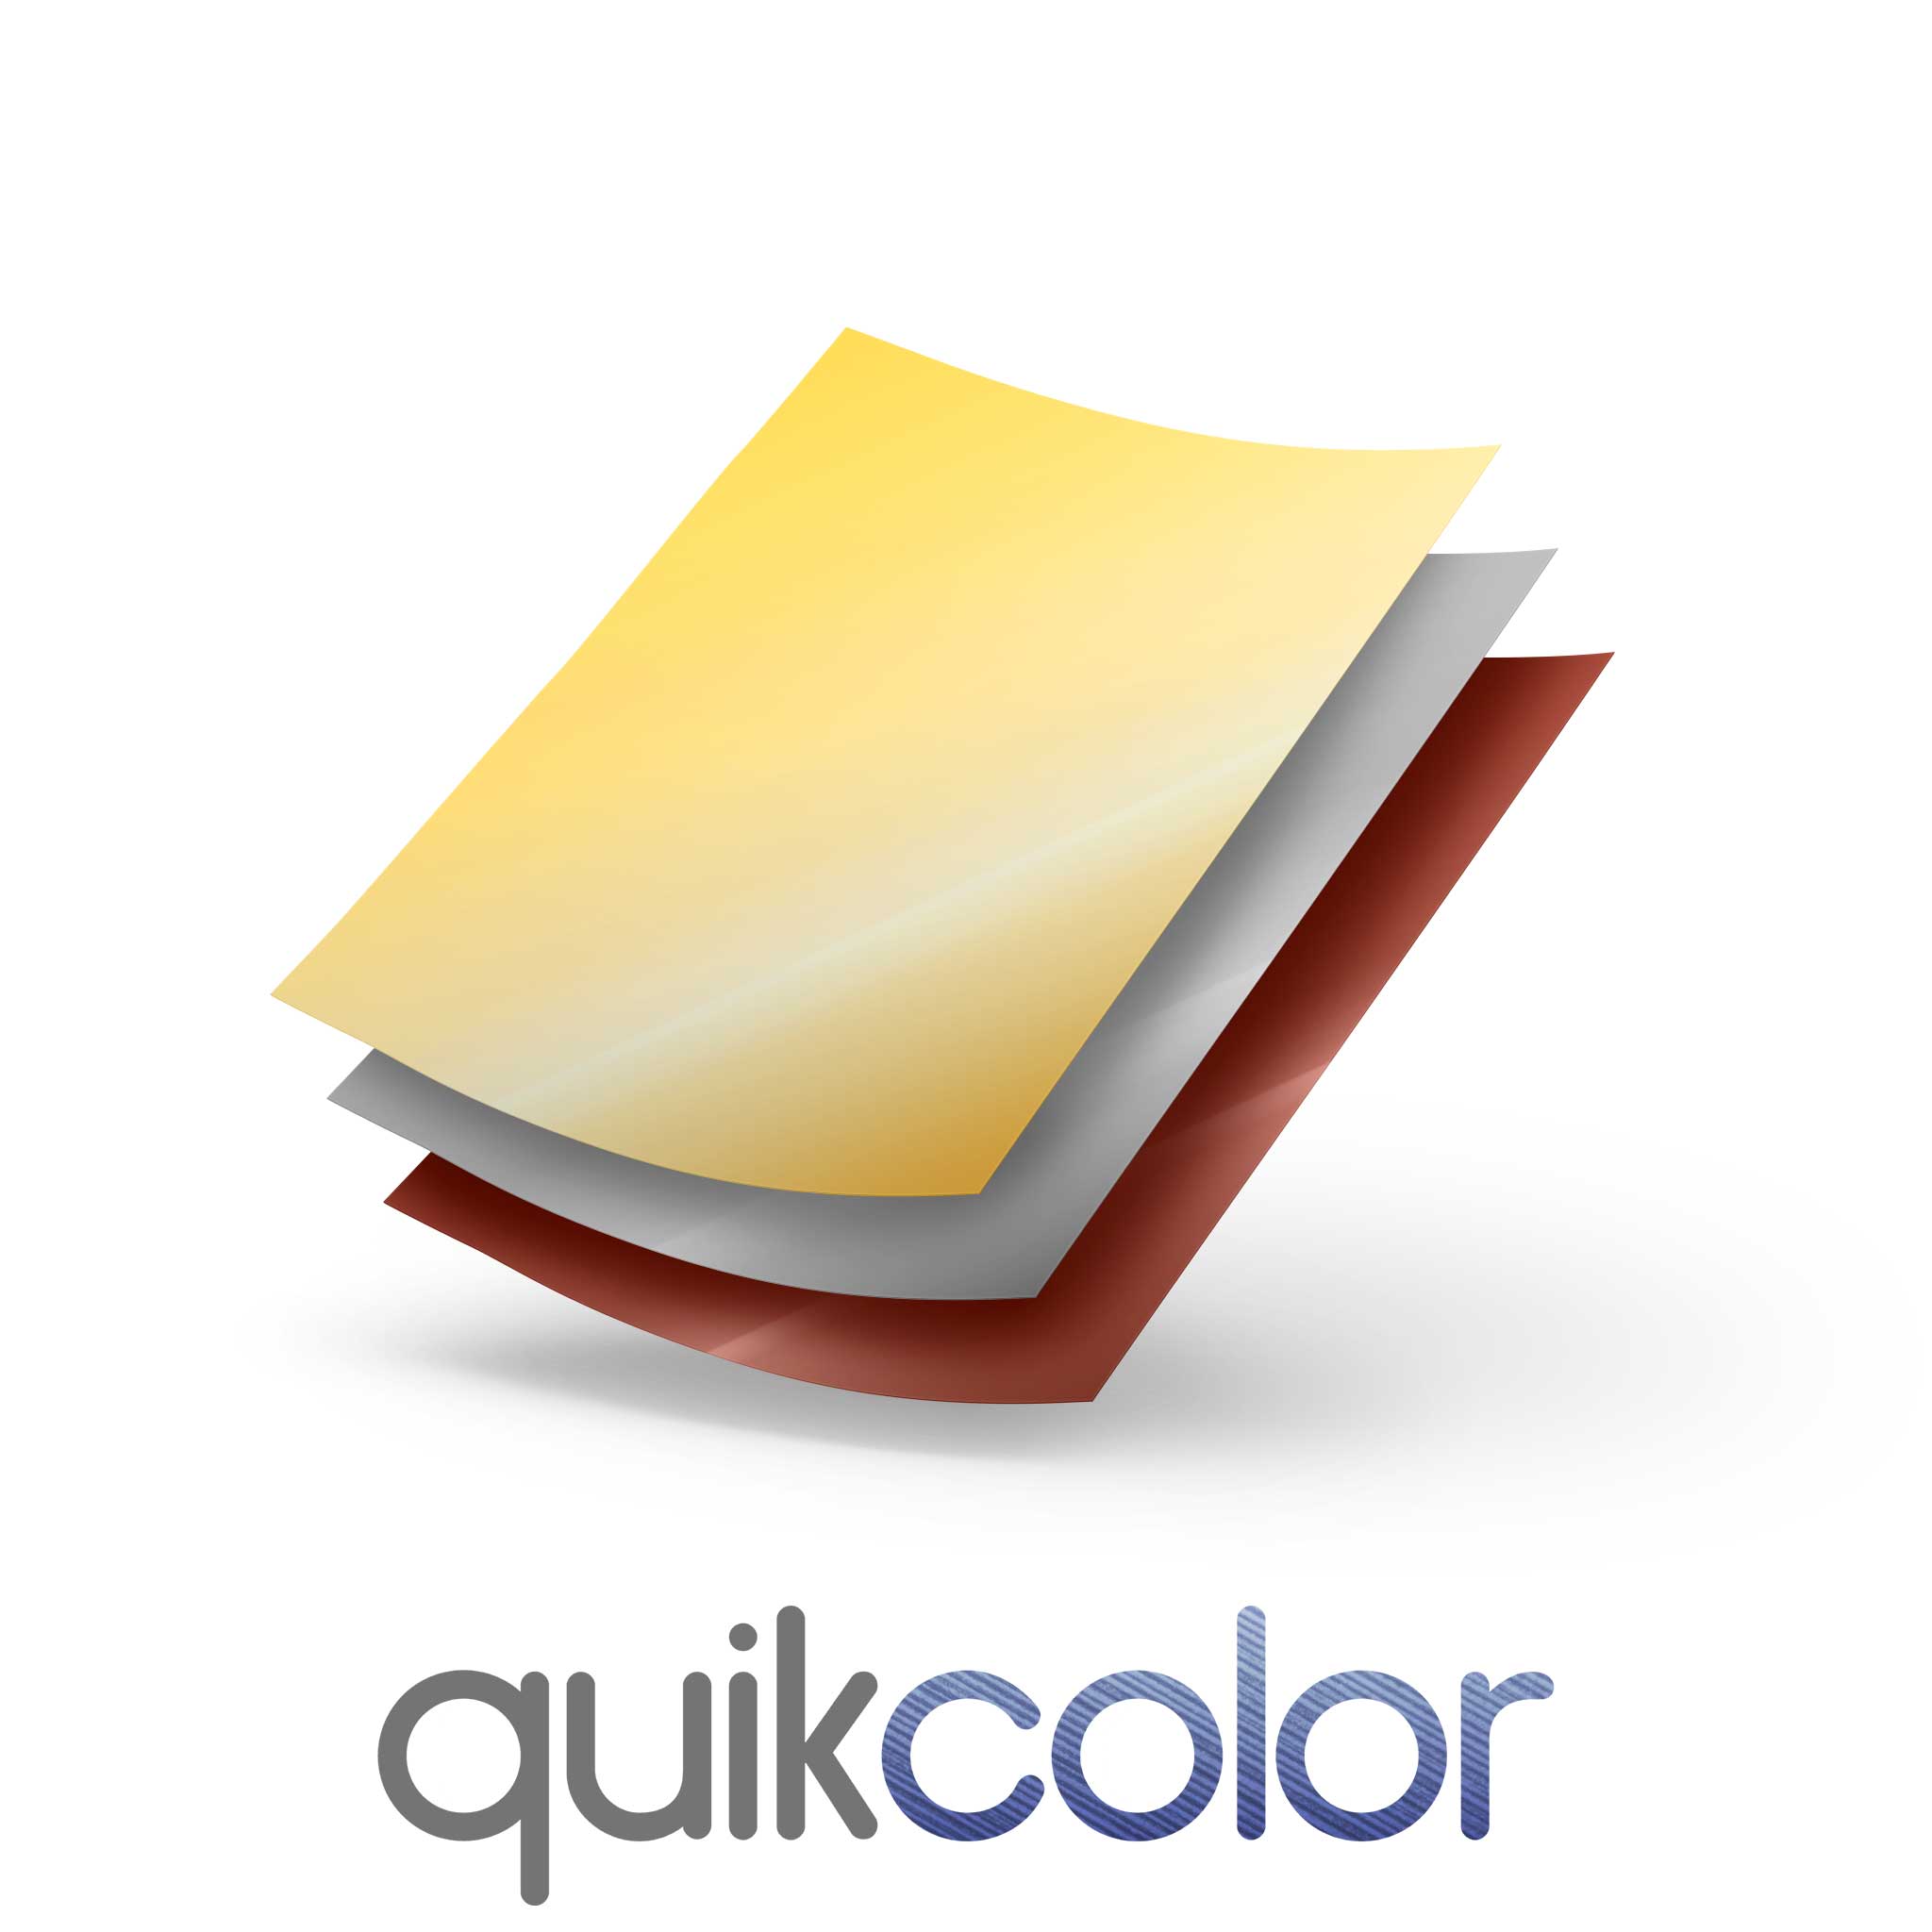 Quikcolor Metallic Hard Surface 1-Step Transfer Media for Ceramic, Glass and Metal